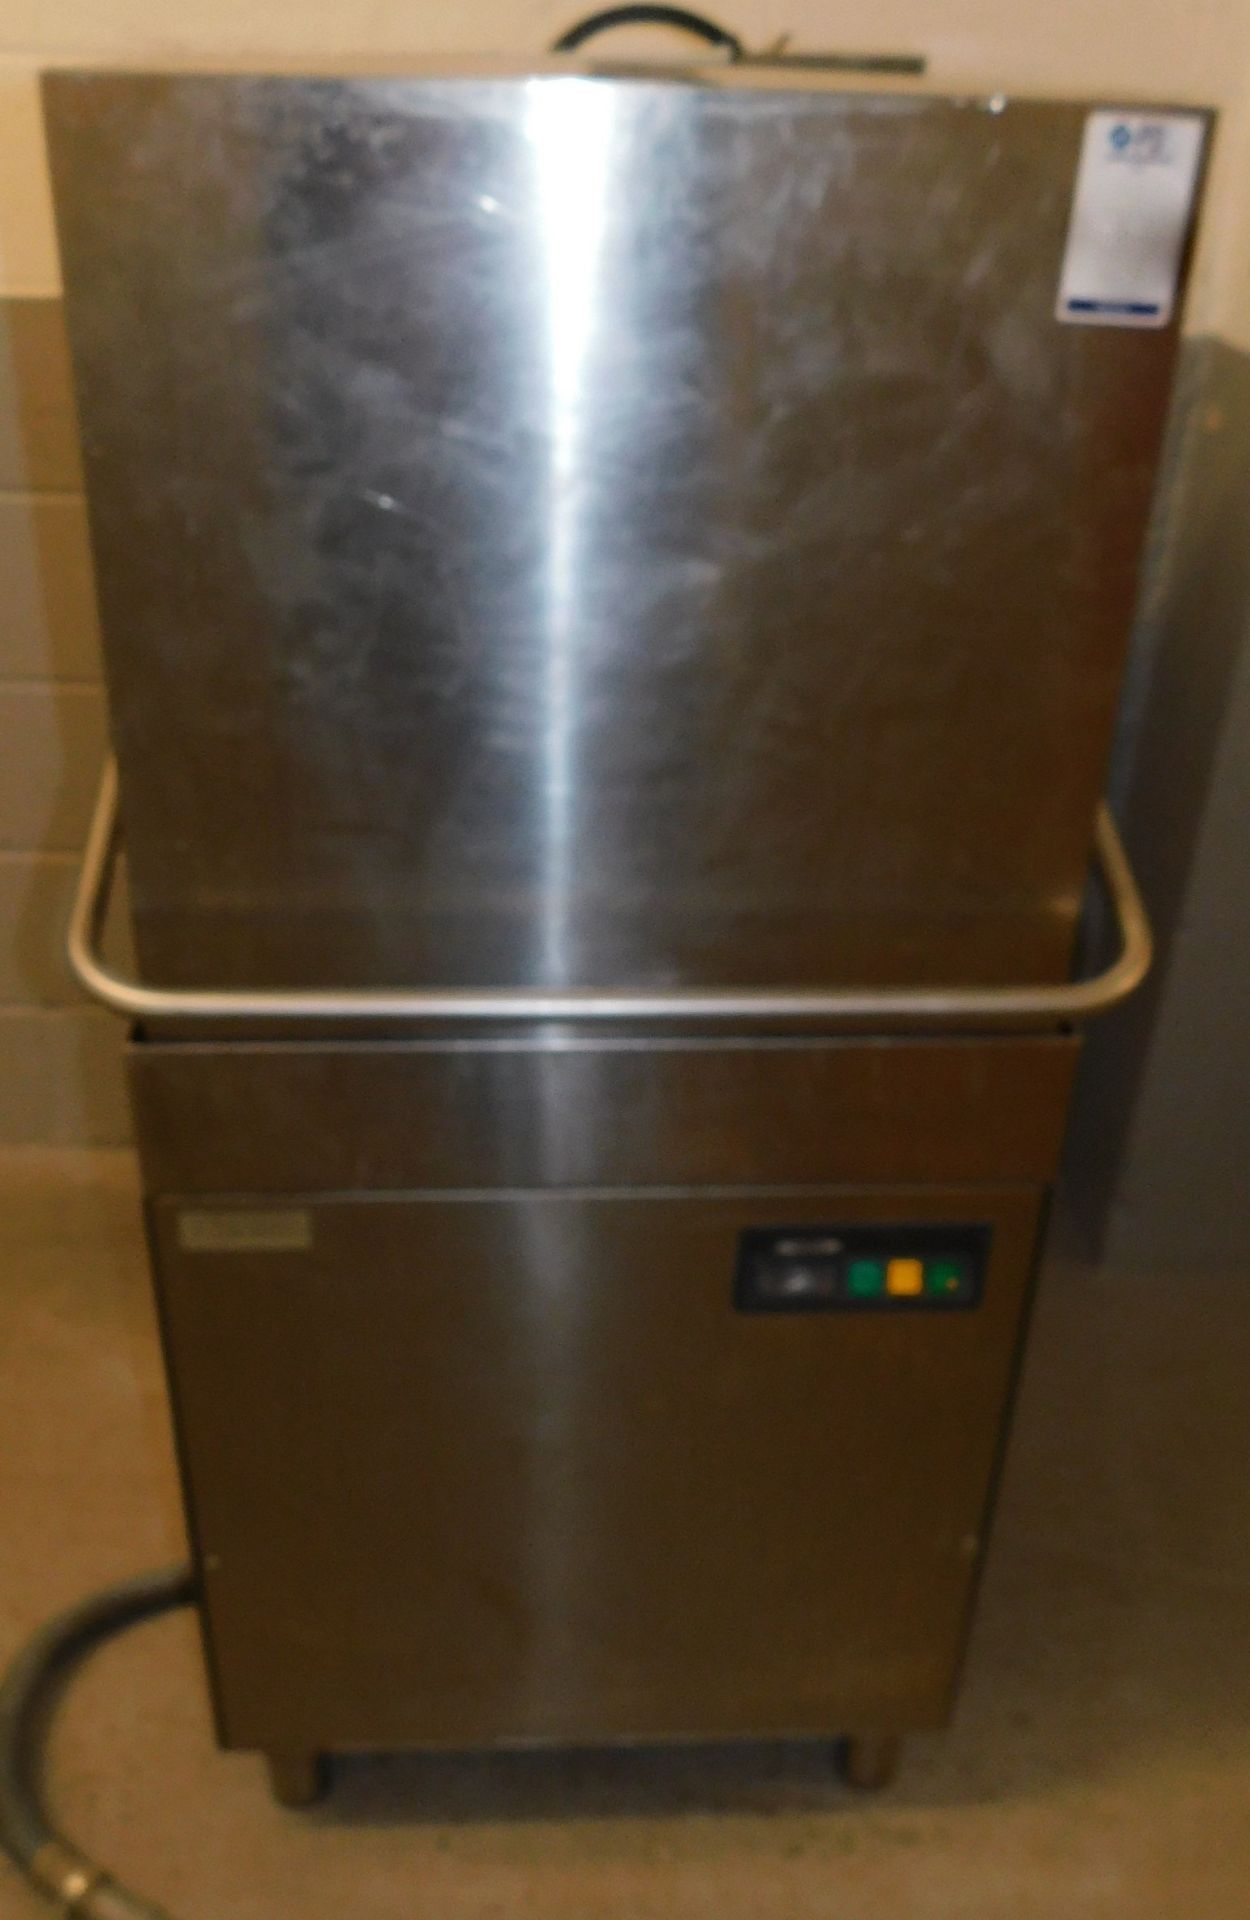 Romo Up and Over Stainless Steel Dishwasher (Location Stockport. Please See General Notes)